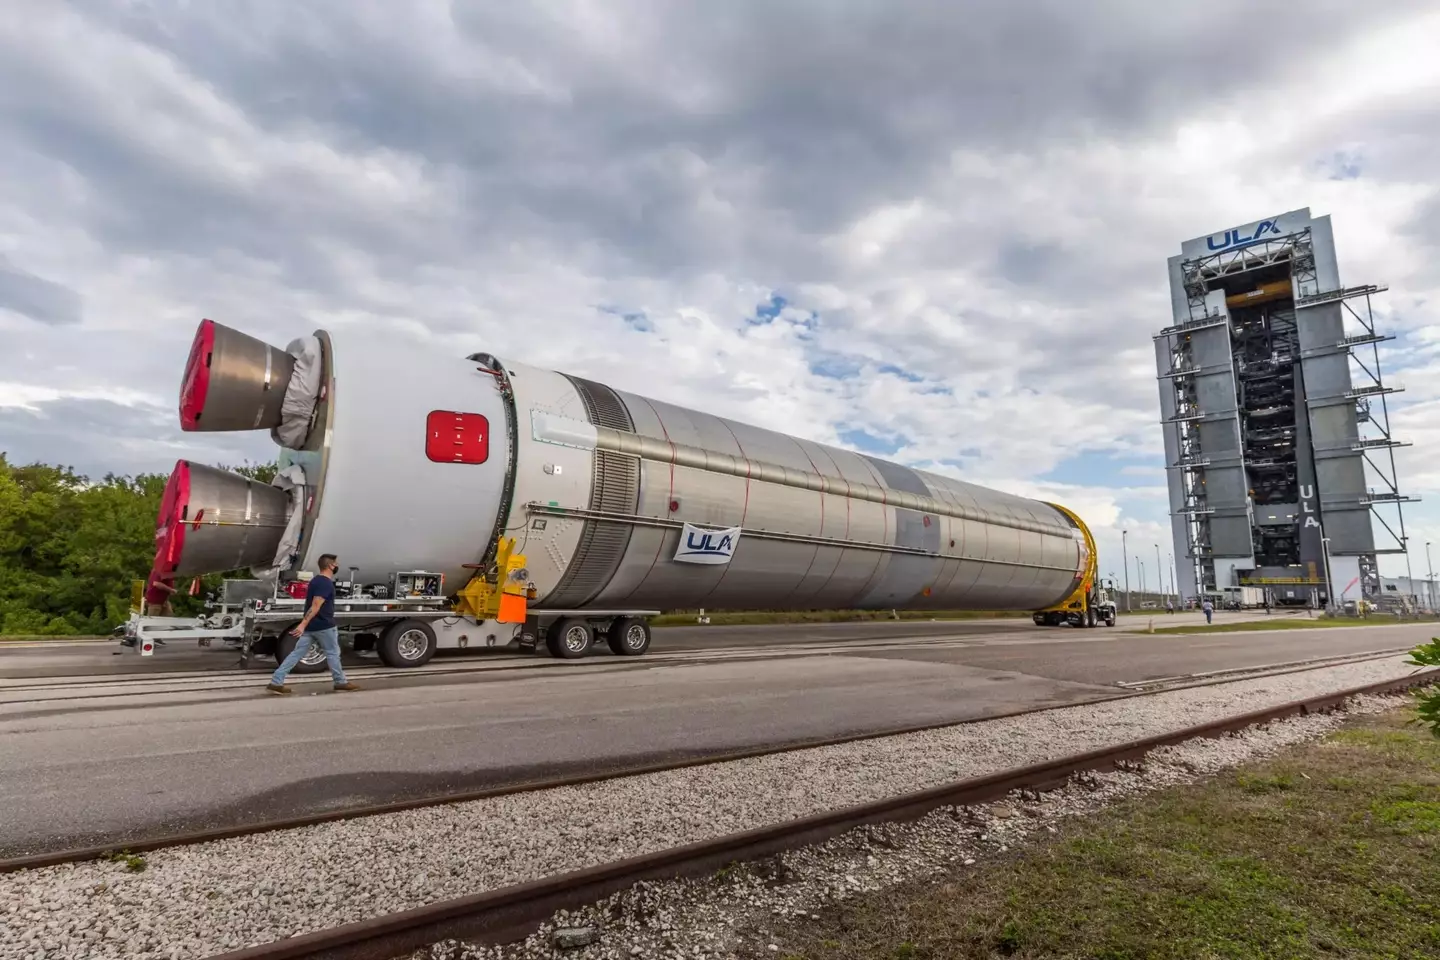 The rocket is scheduled to launch in the early hours of January 8.